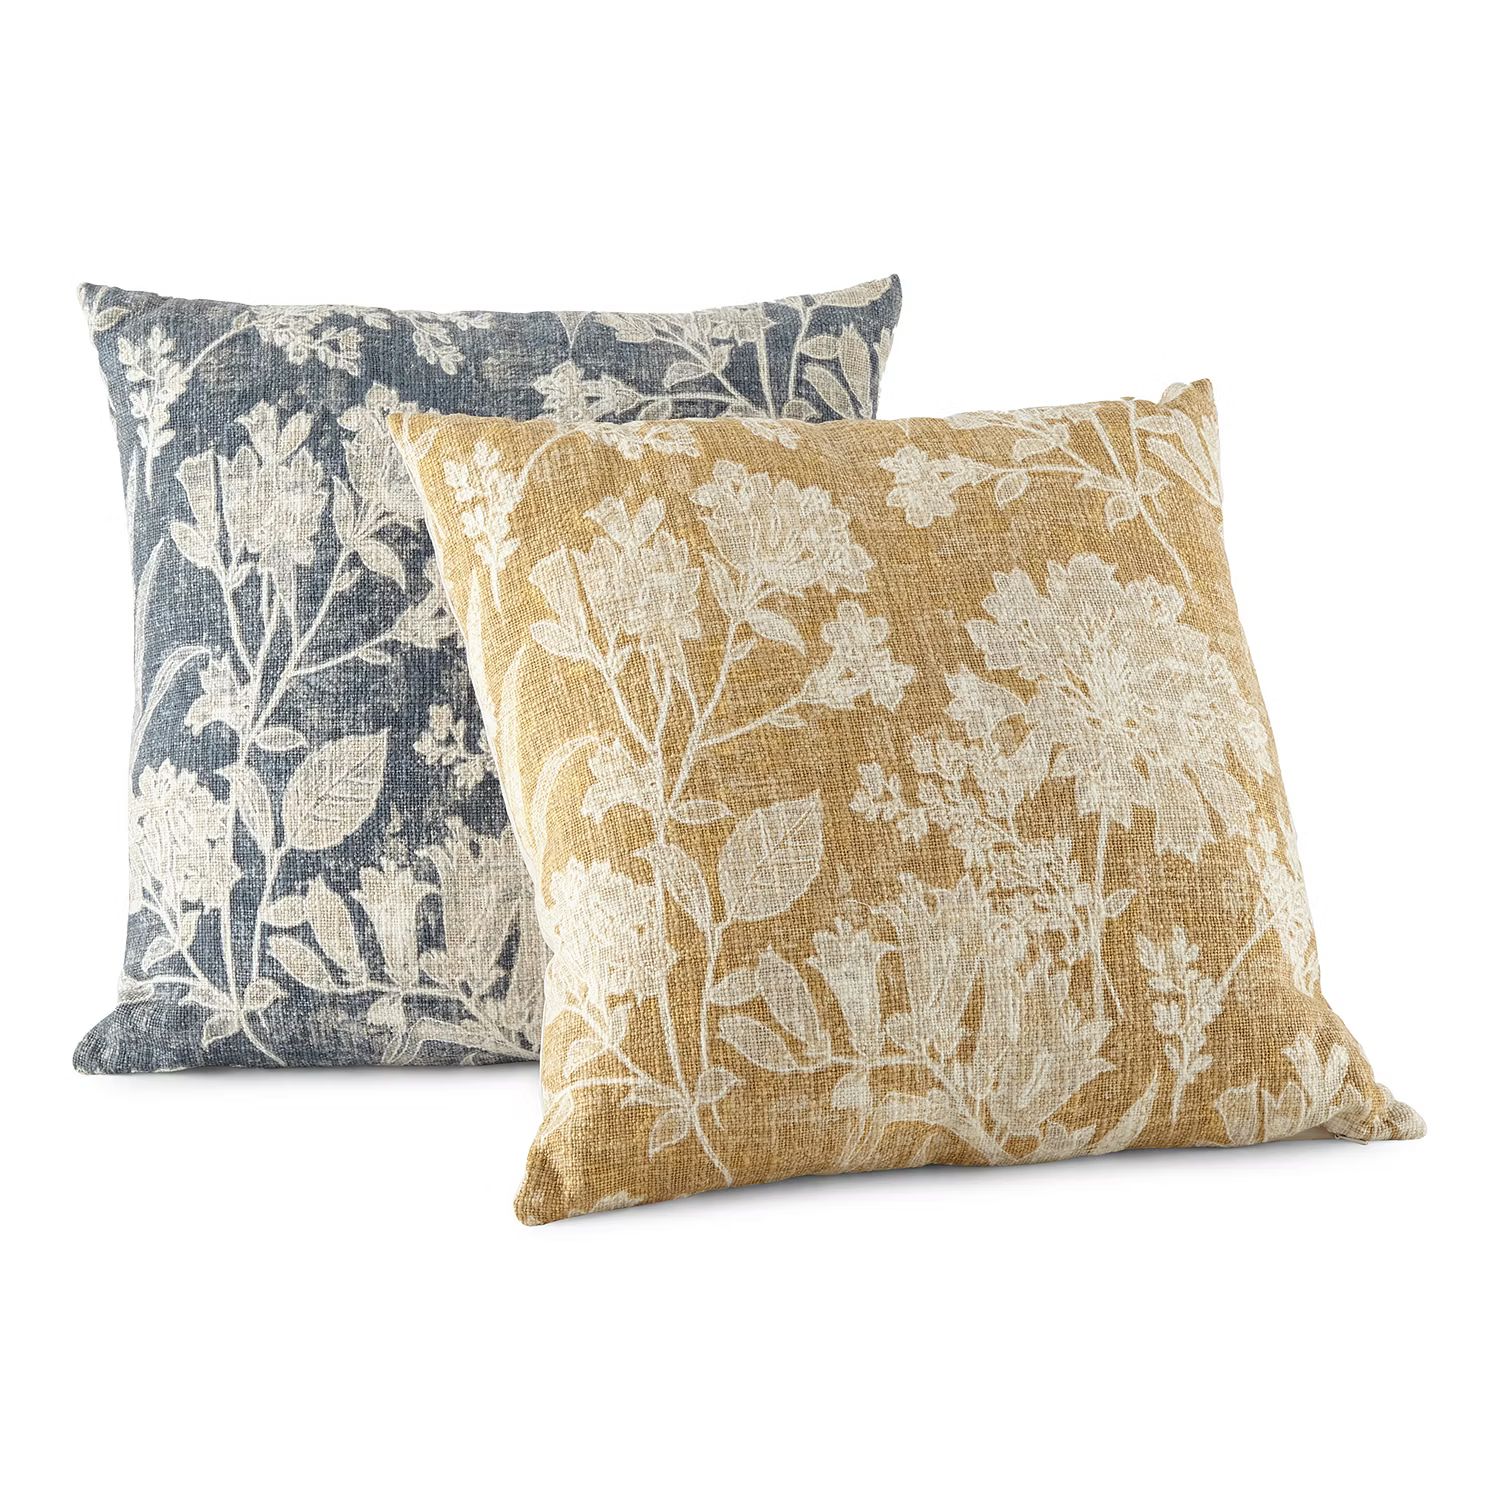 Linden Street Floral Square Throw Pillow | JCPenney